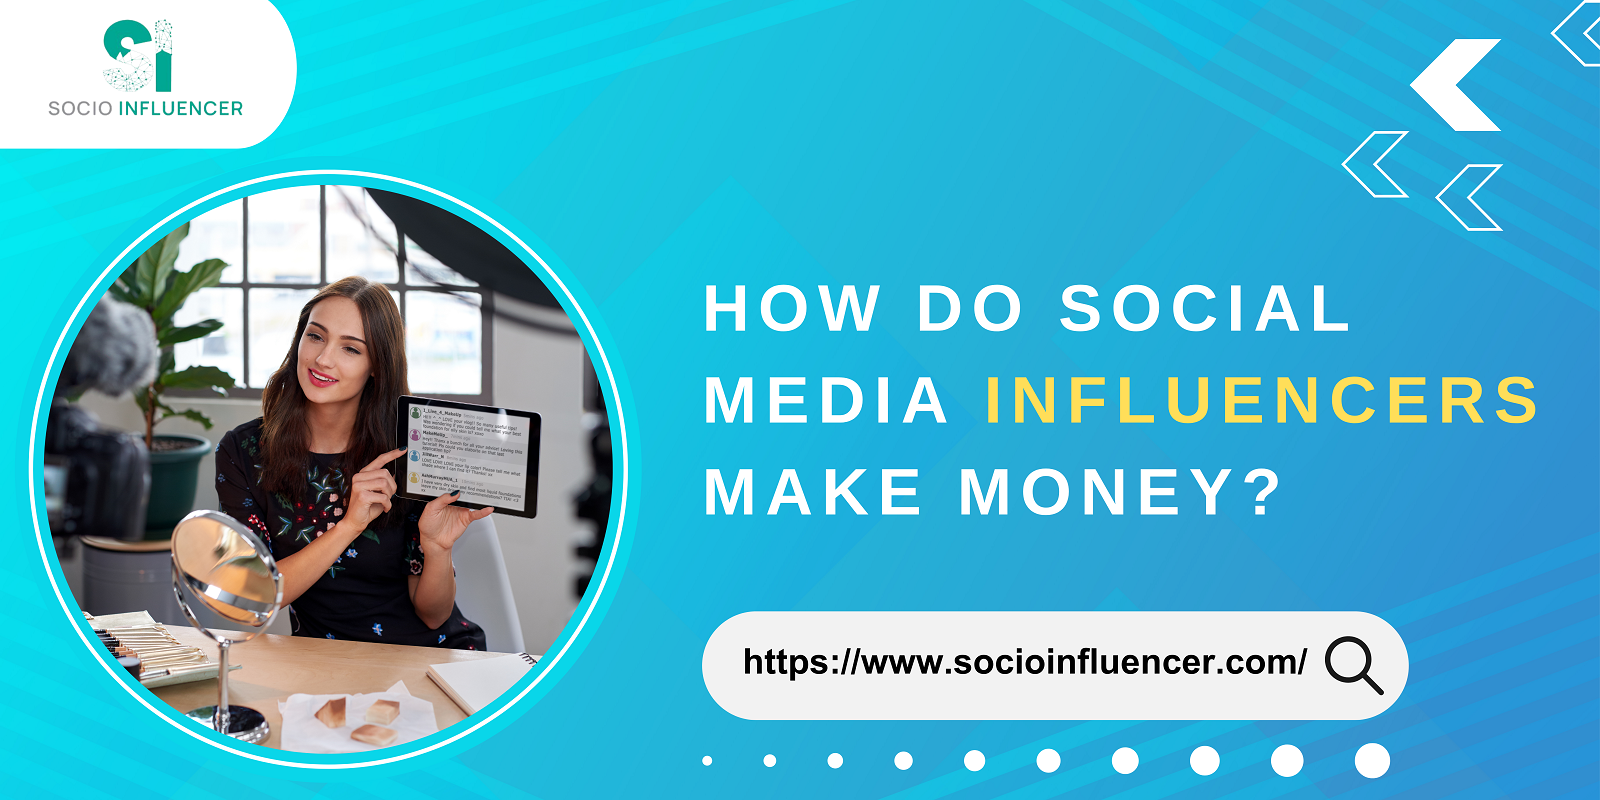 In What Ways Do Social Media Influencers Earn Money?